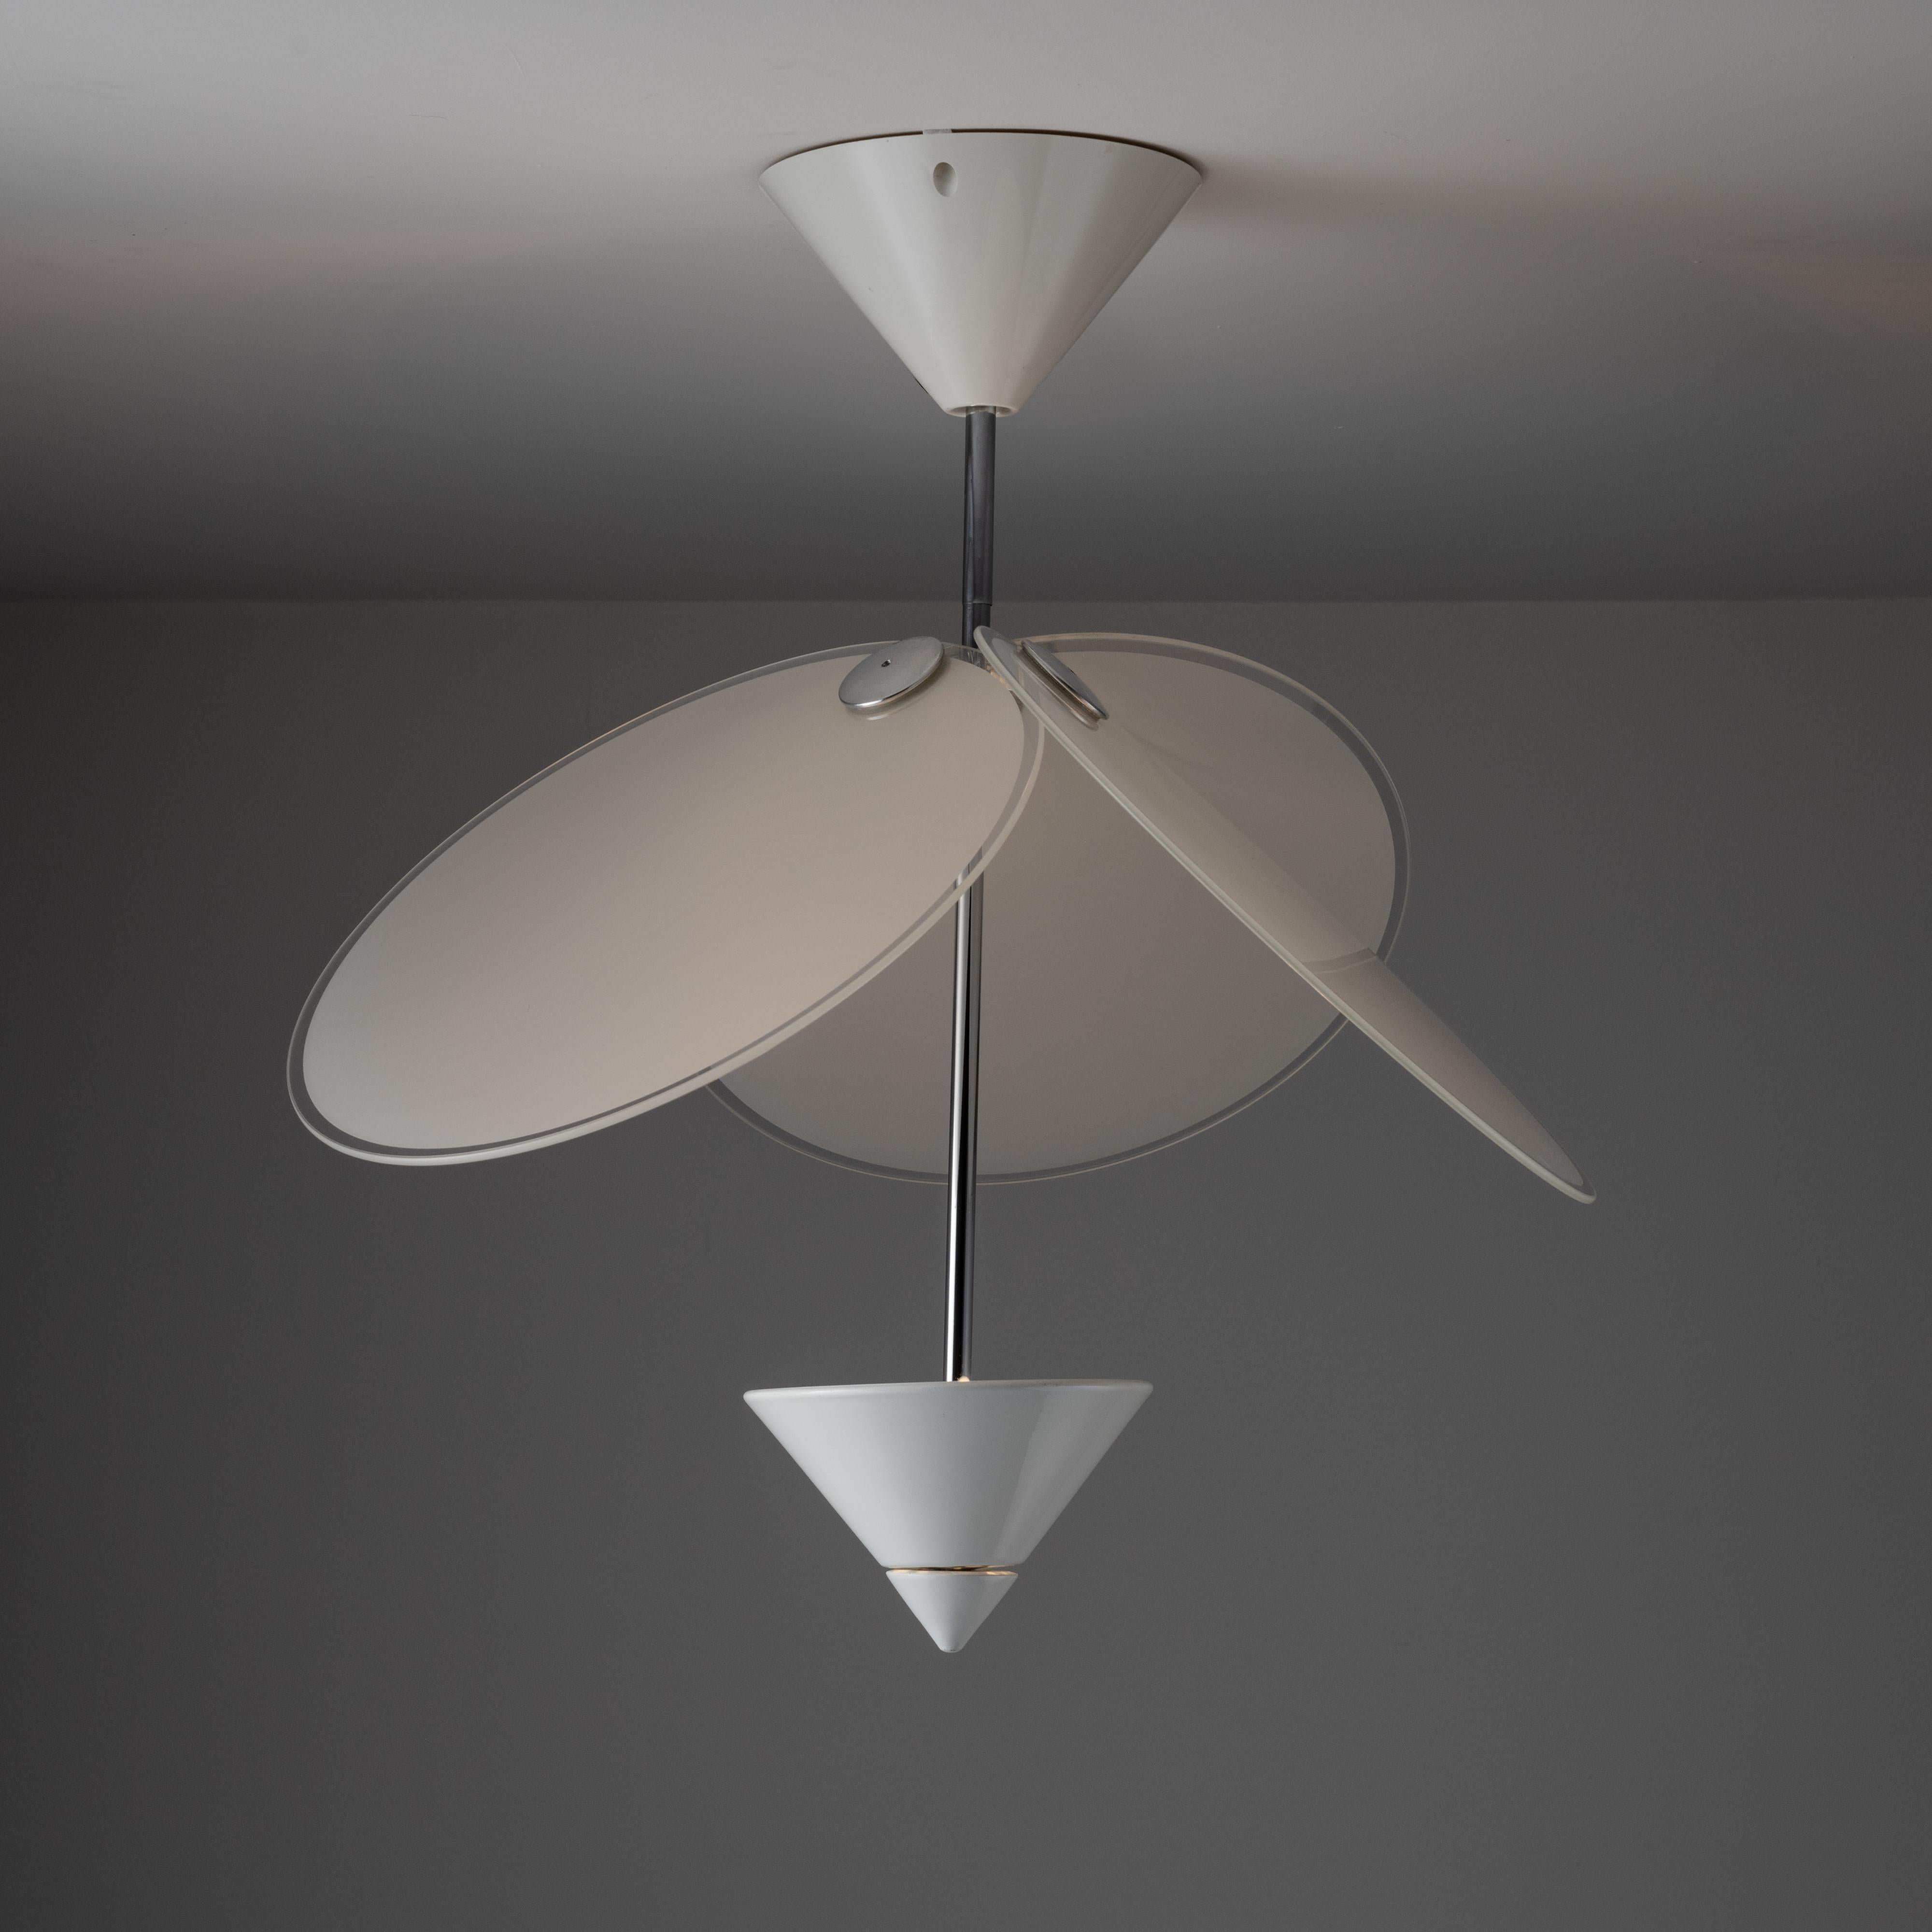 Italian Rare Ceiling Light by Vico Magistretti for Oluce For Sale